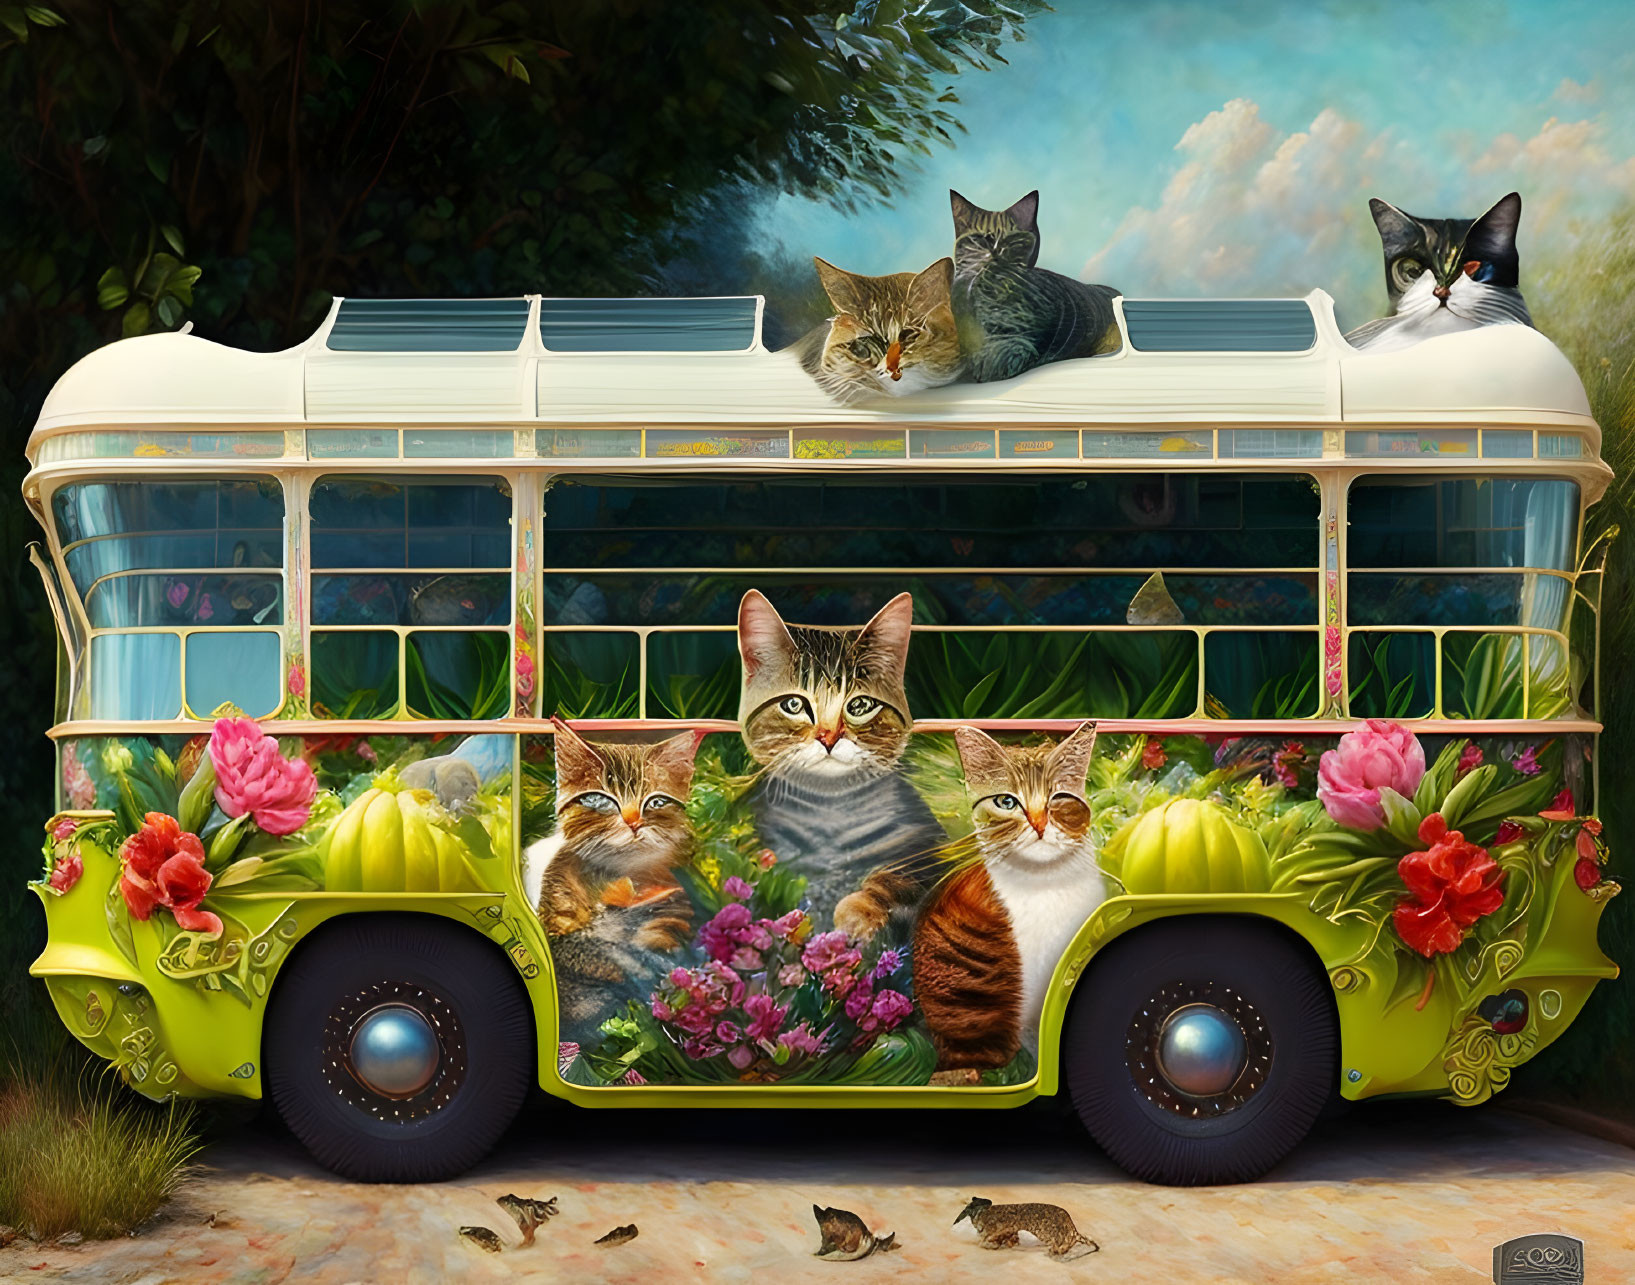 aloe vera bus with cats inside and outside. Patchw